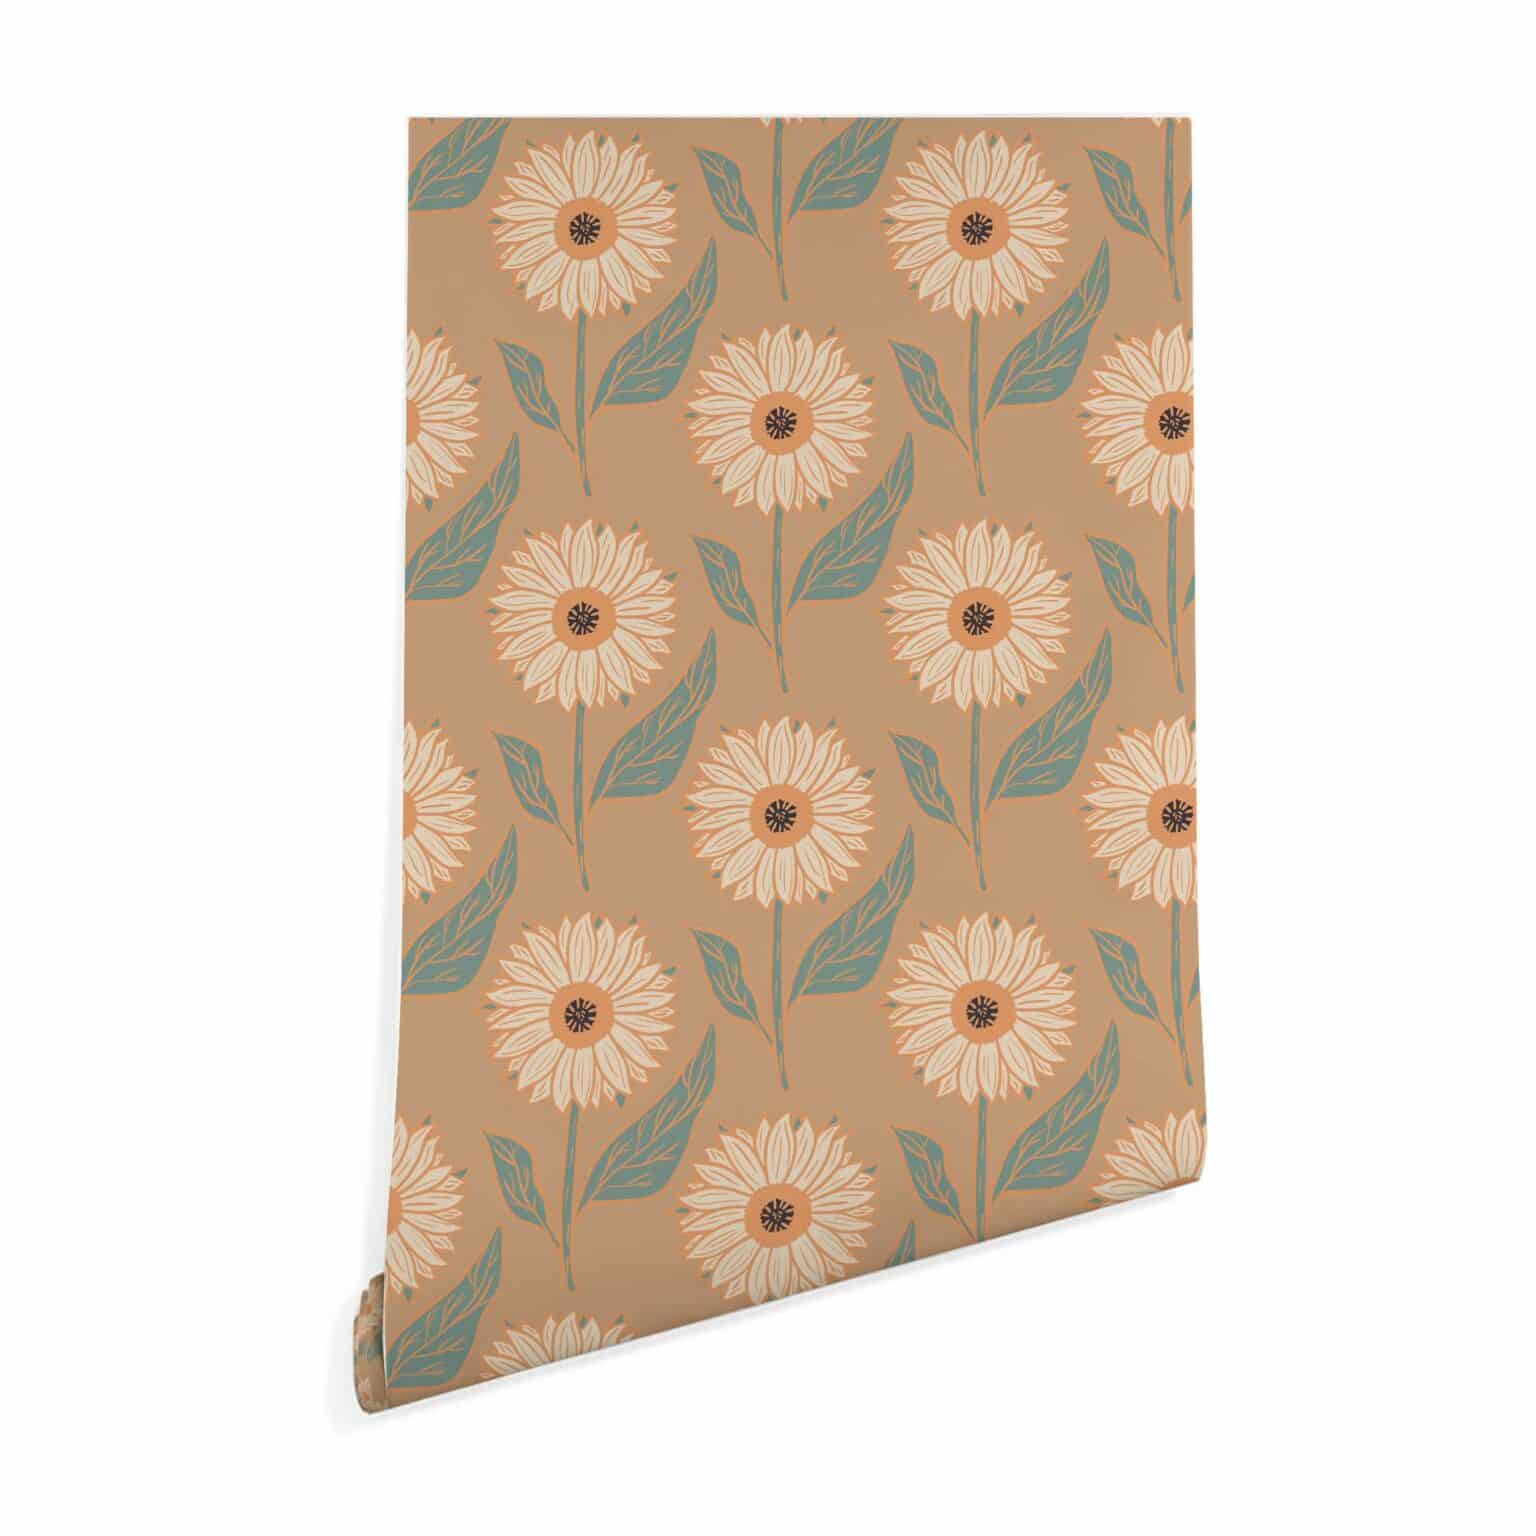 Warm sunflower floral pattern wallpaper - Peel and Stick Removable | Fancy Walls